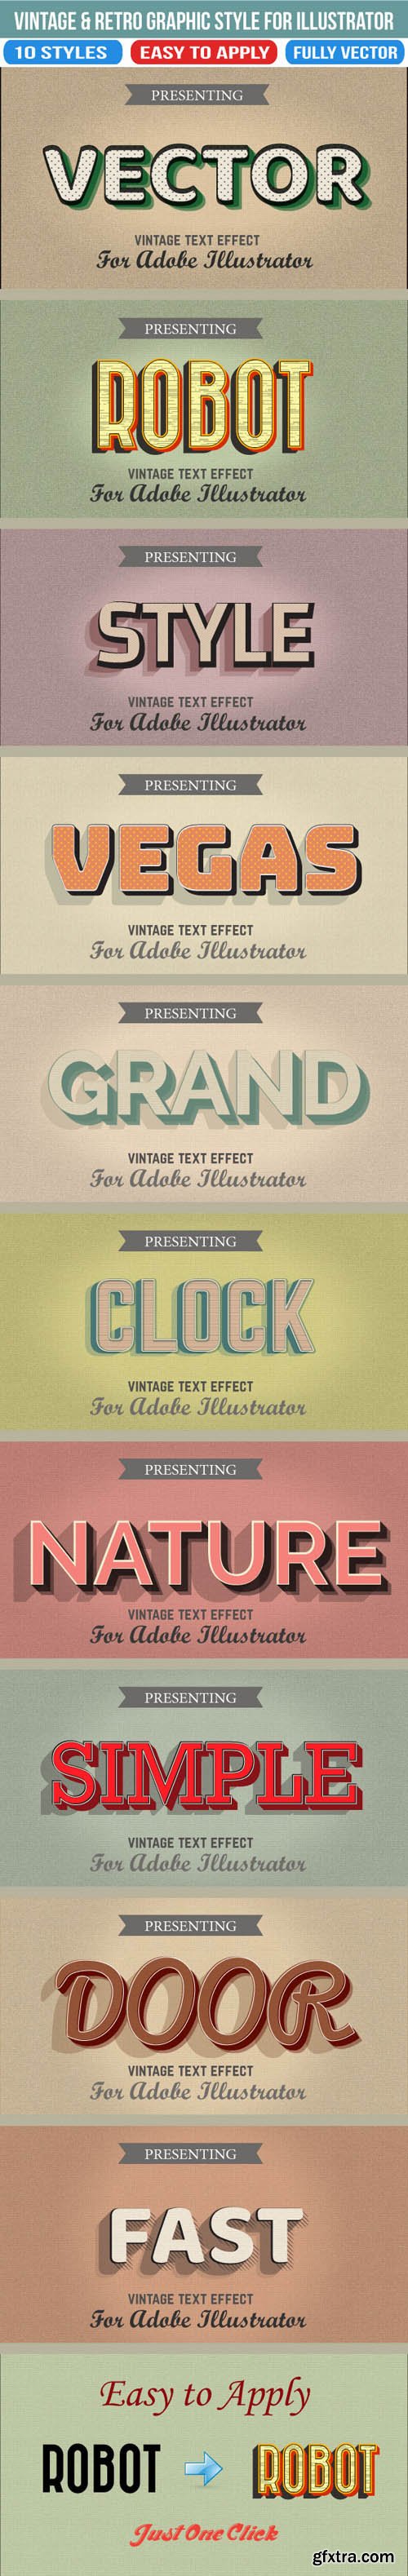 GR - Awesome Vintage Graphic Styles for Illustrator 19944202